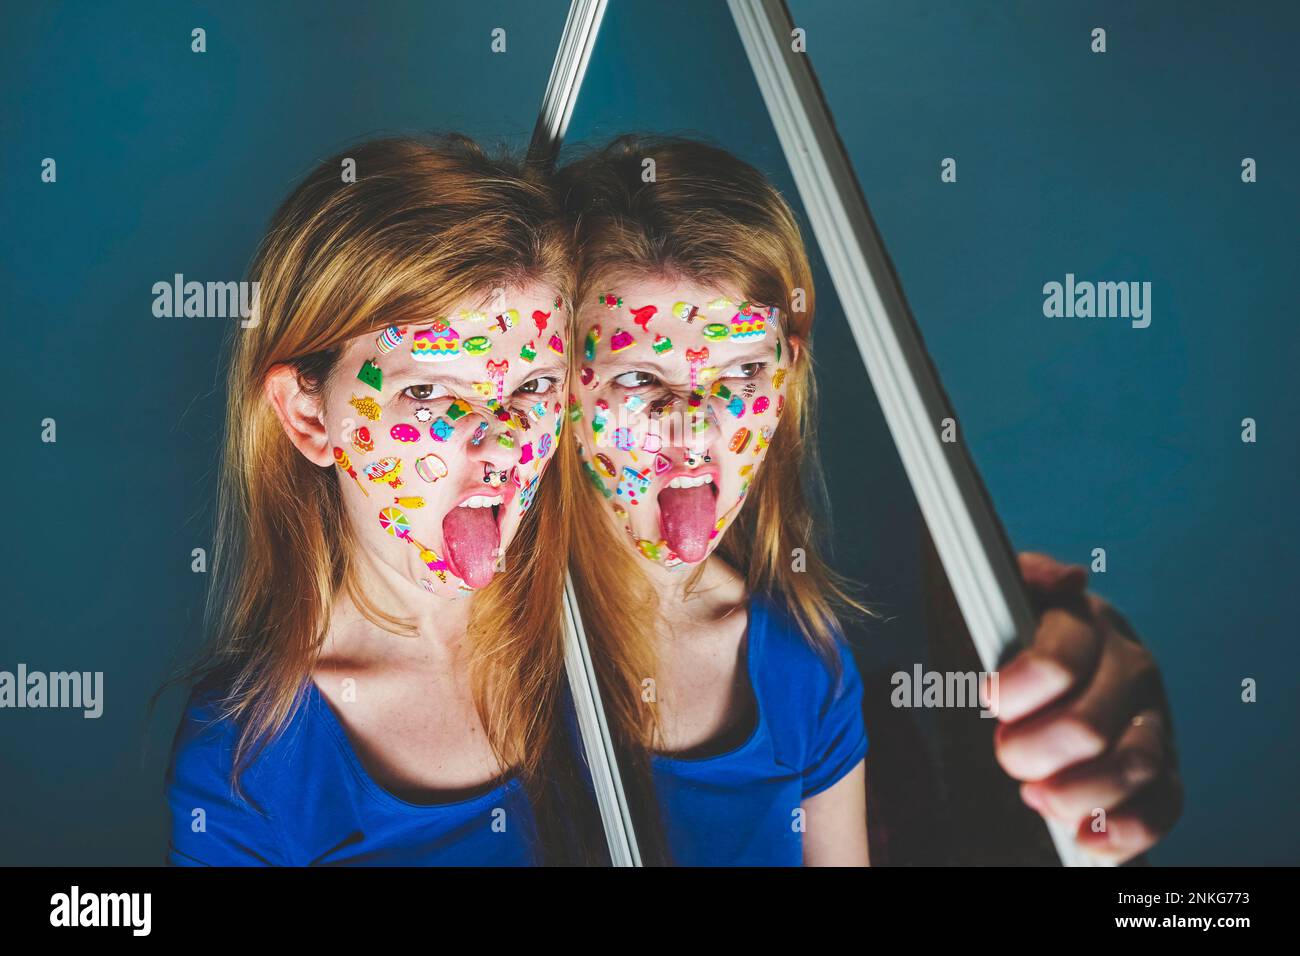 Woman with mirror sticking out tongue against blue background Stock Photo